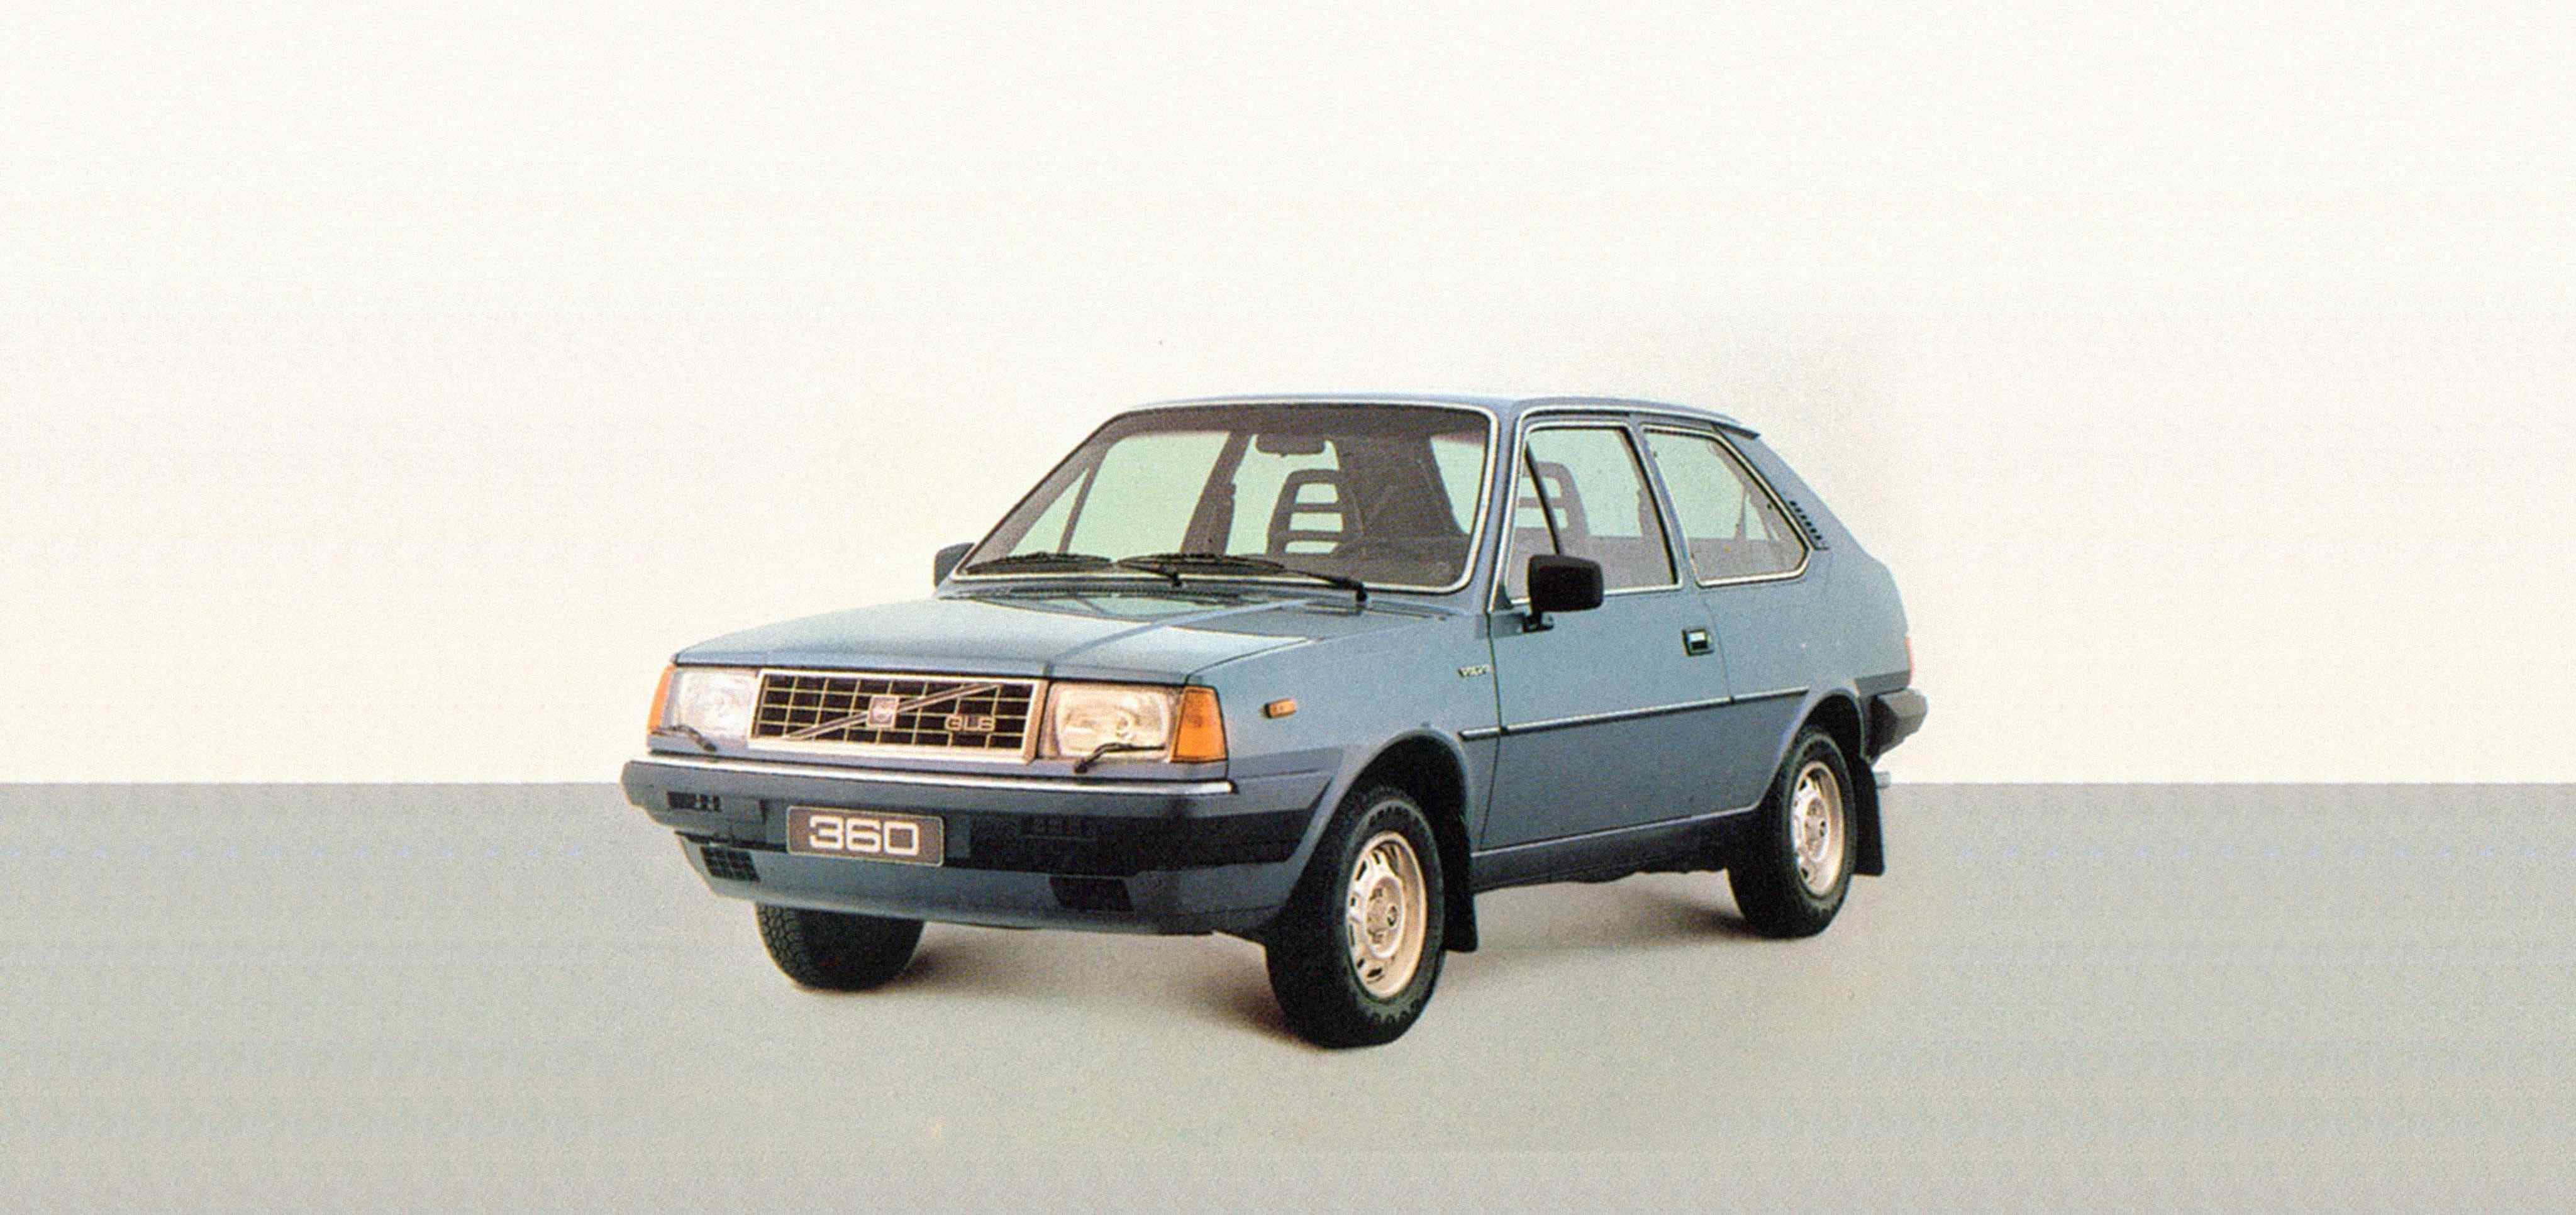 A blue 3-door Volvo 360 in a white studio environment